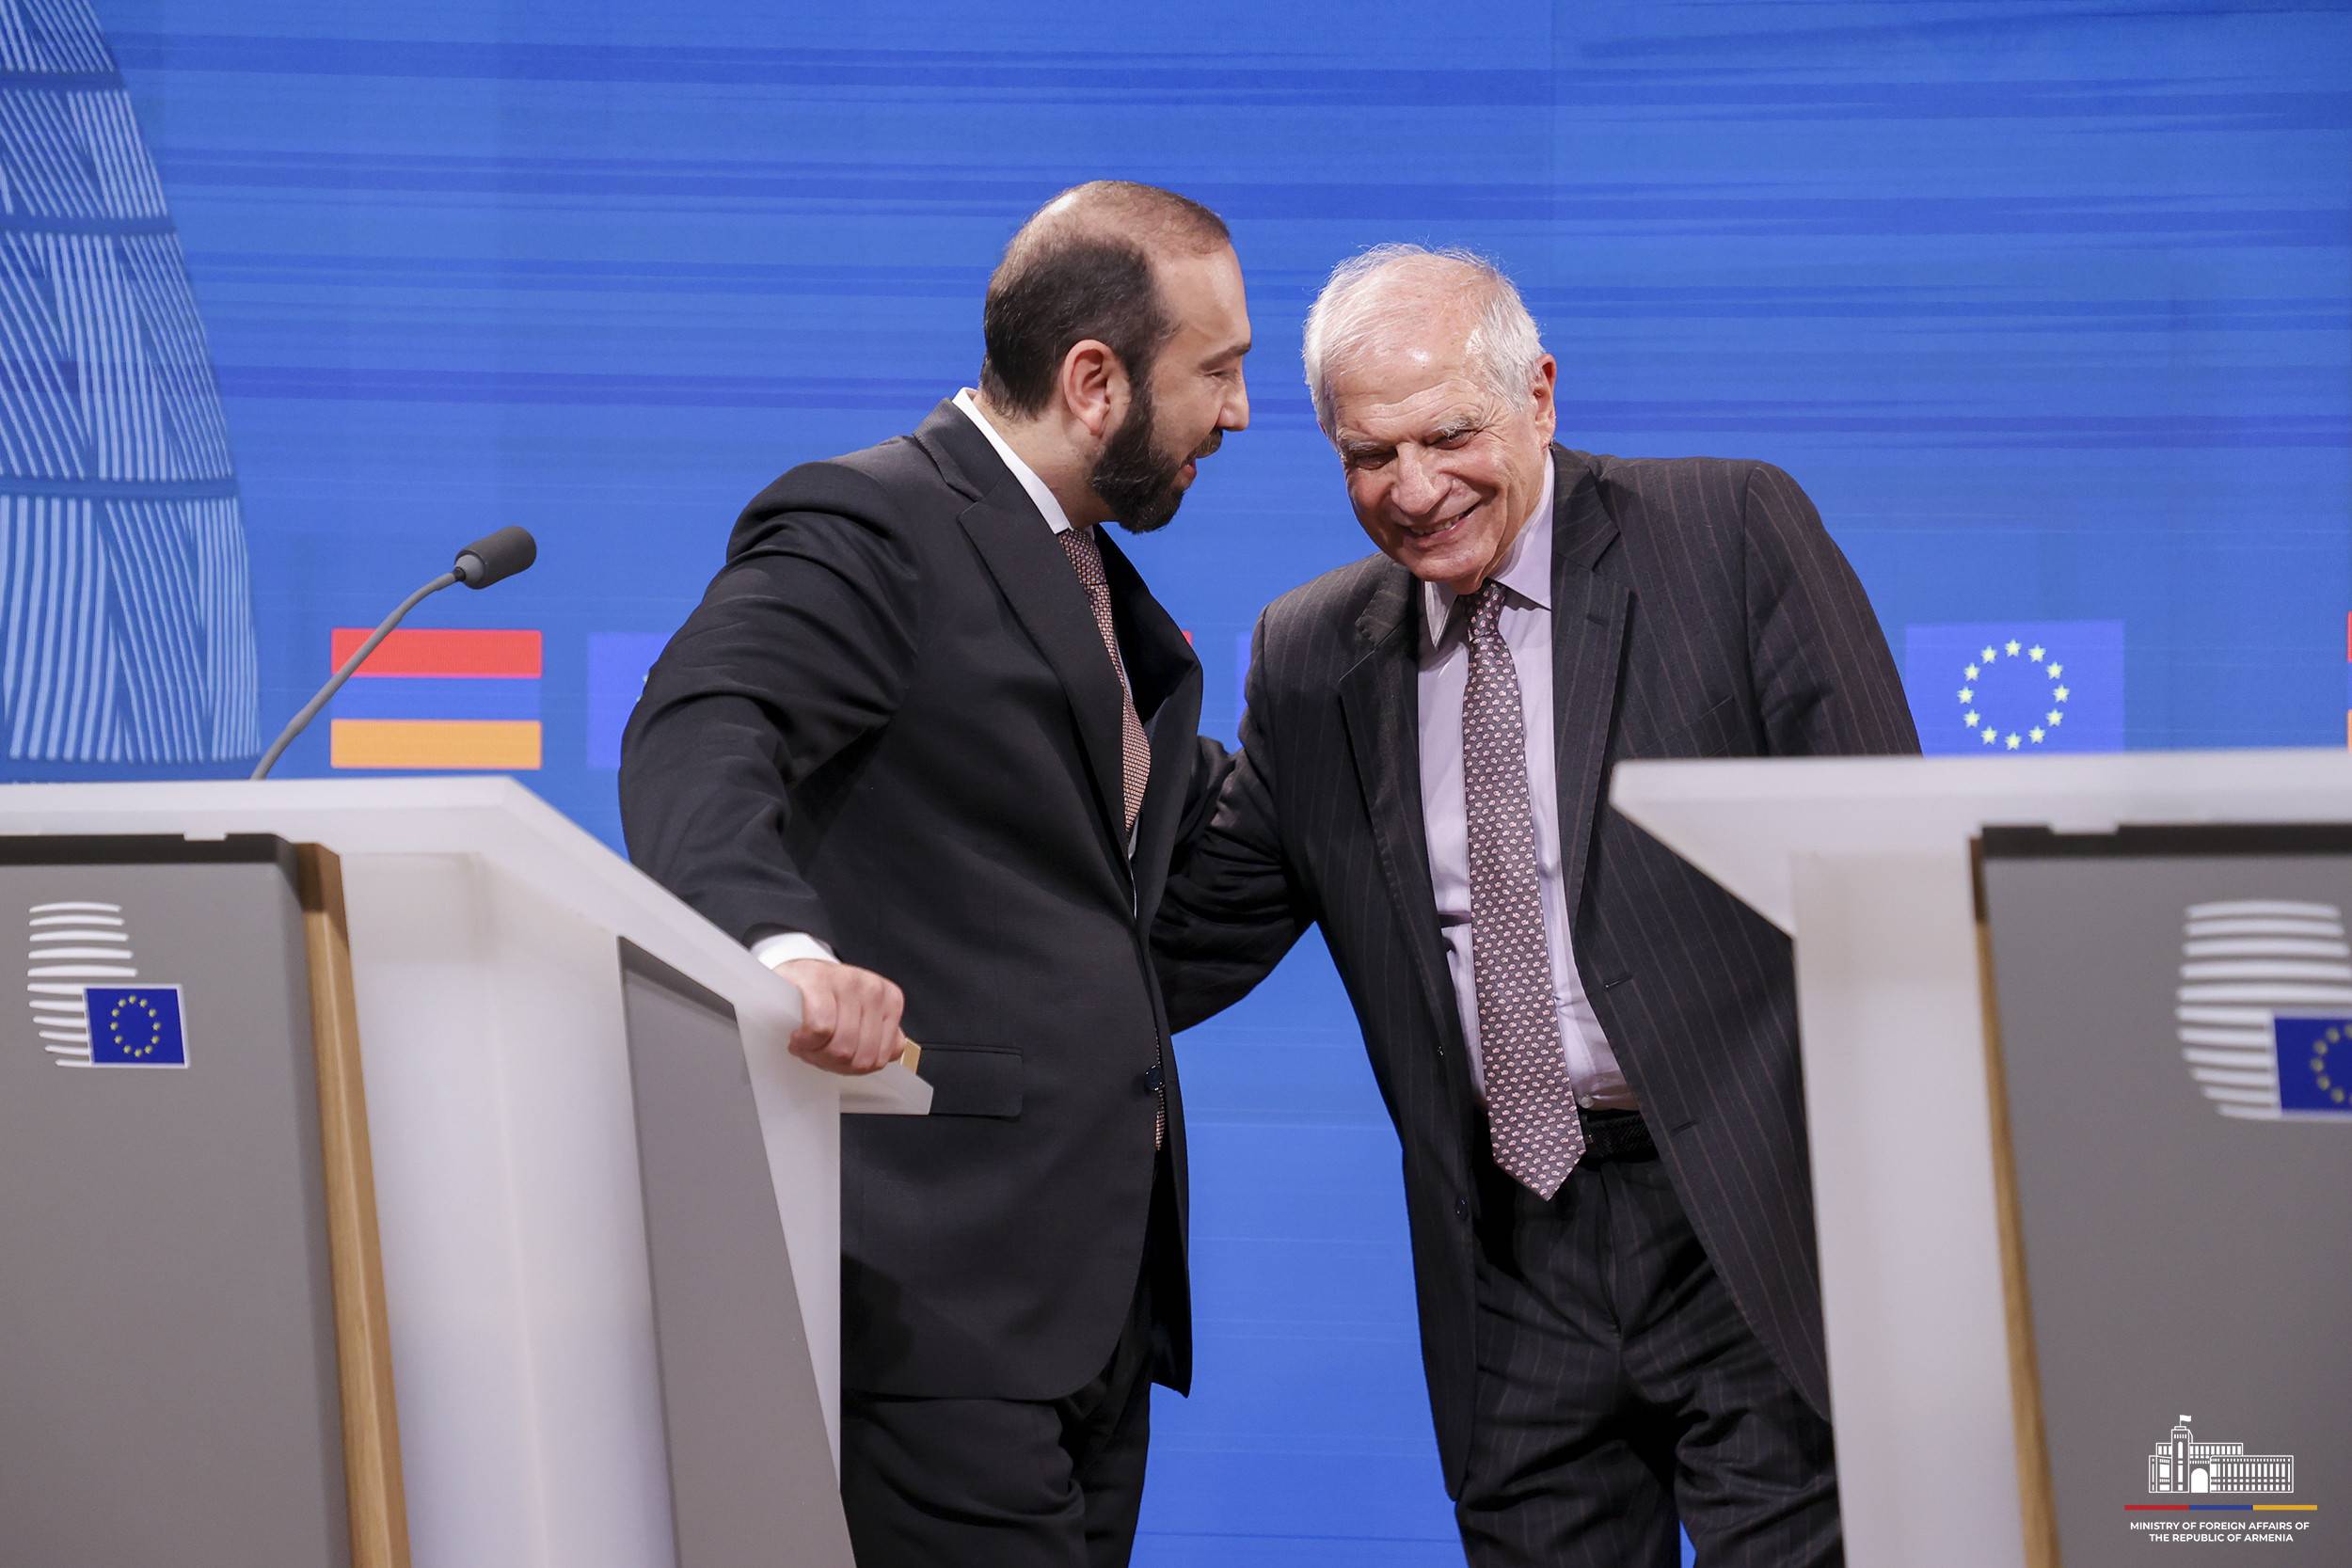 Statements by Borrell and Mirzoyan at a press conference